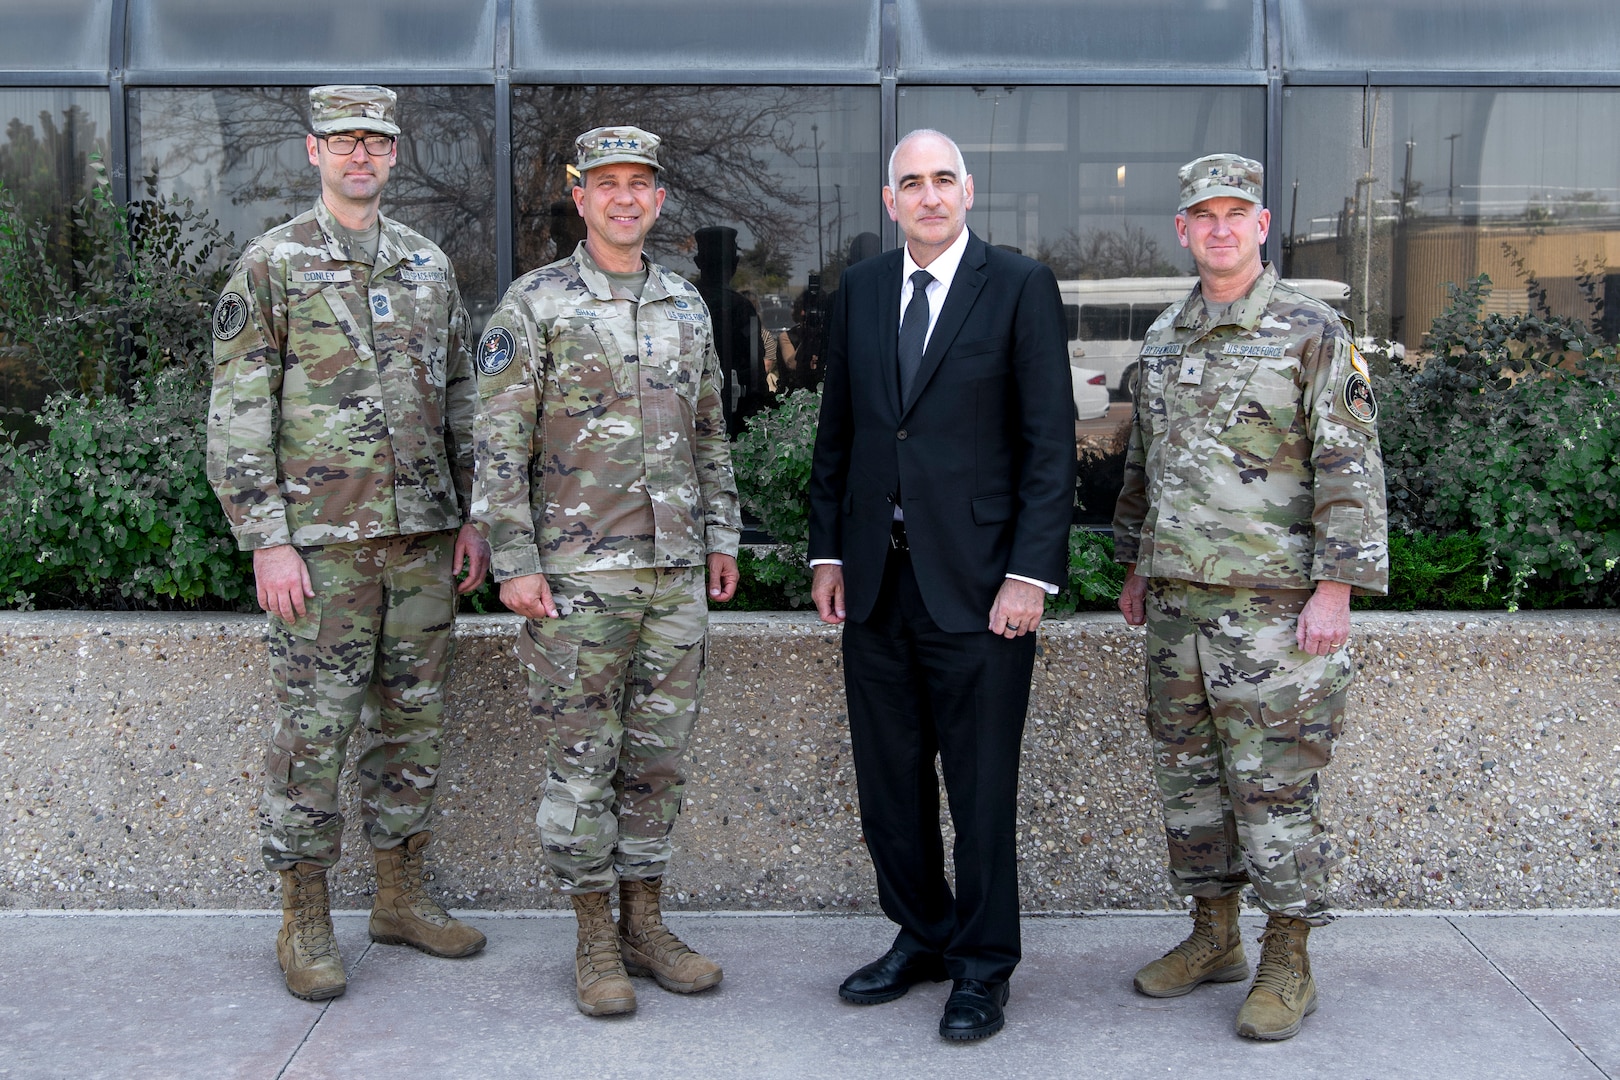 Four men, three in military uniforms and one in a suit, pose for a group photo